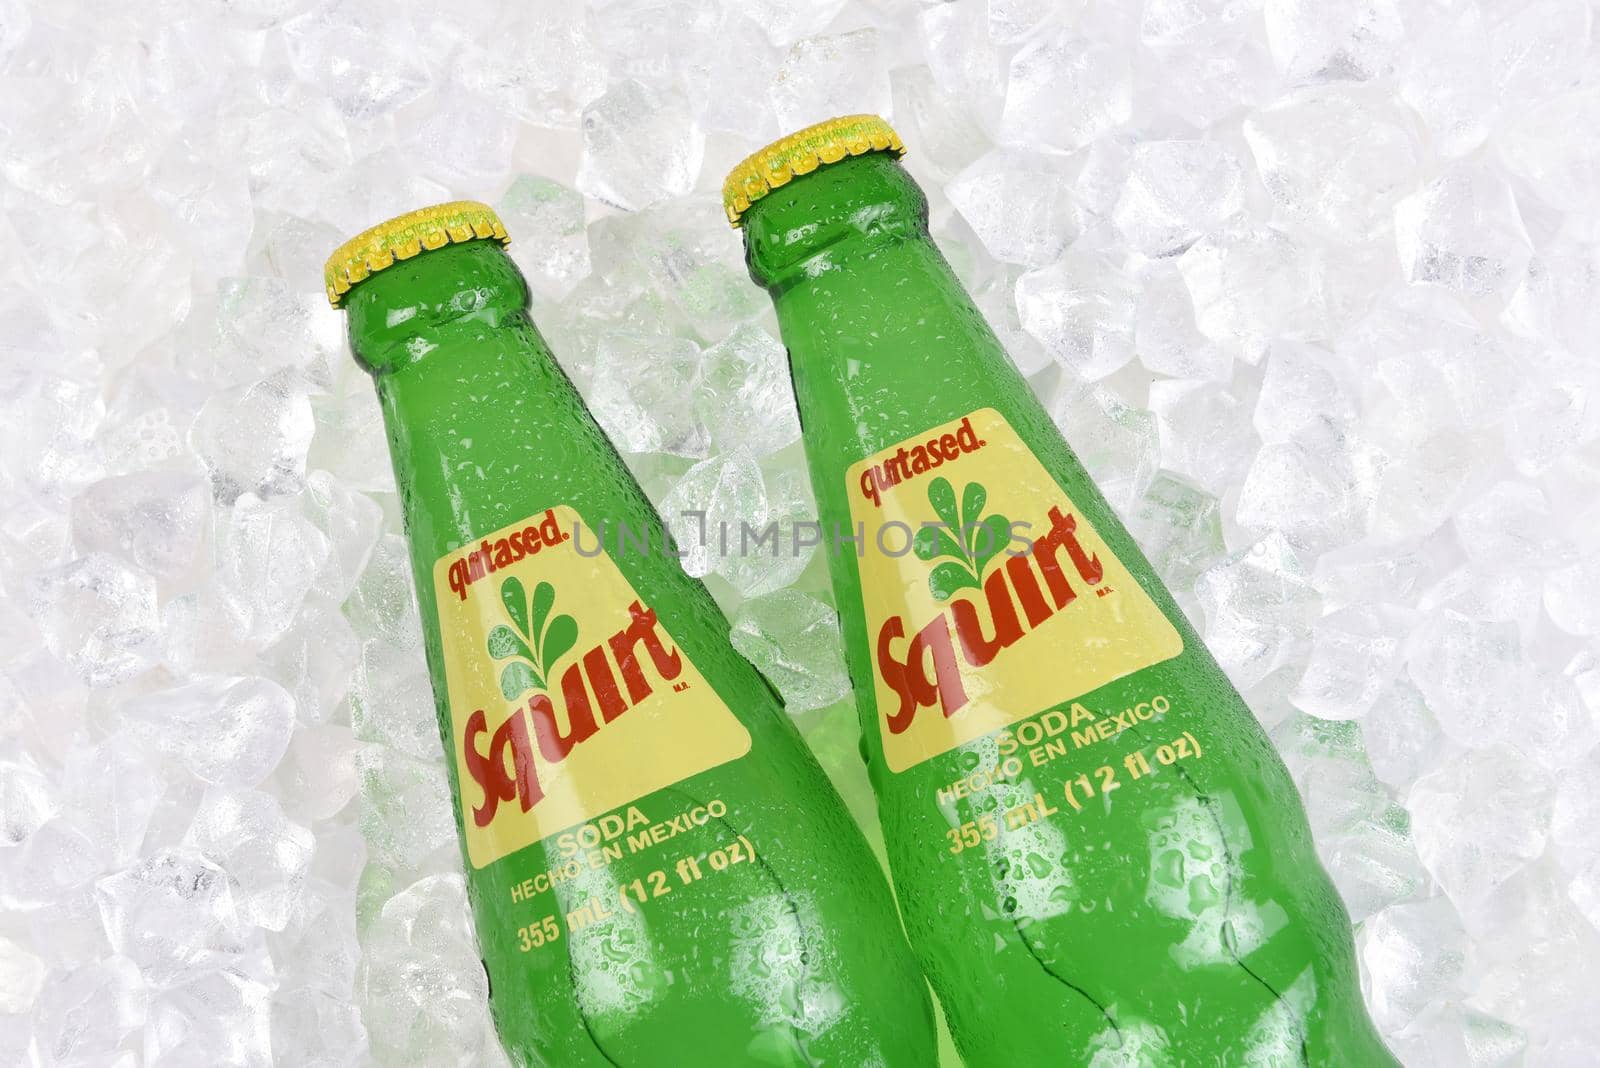 IRVINE, CALIFORNIA - 20 APRIL 2020: Closeup of two Bottles of Squirt Citrus Flavored Soft Drink in a bed of ice. Made in Mexico. by sCukrov